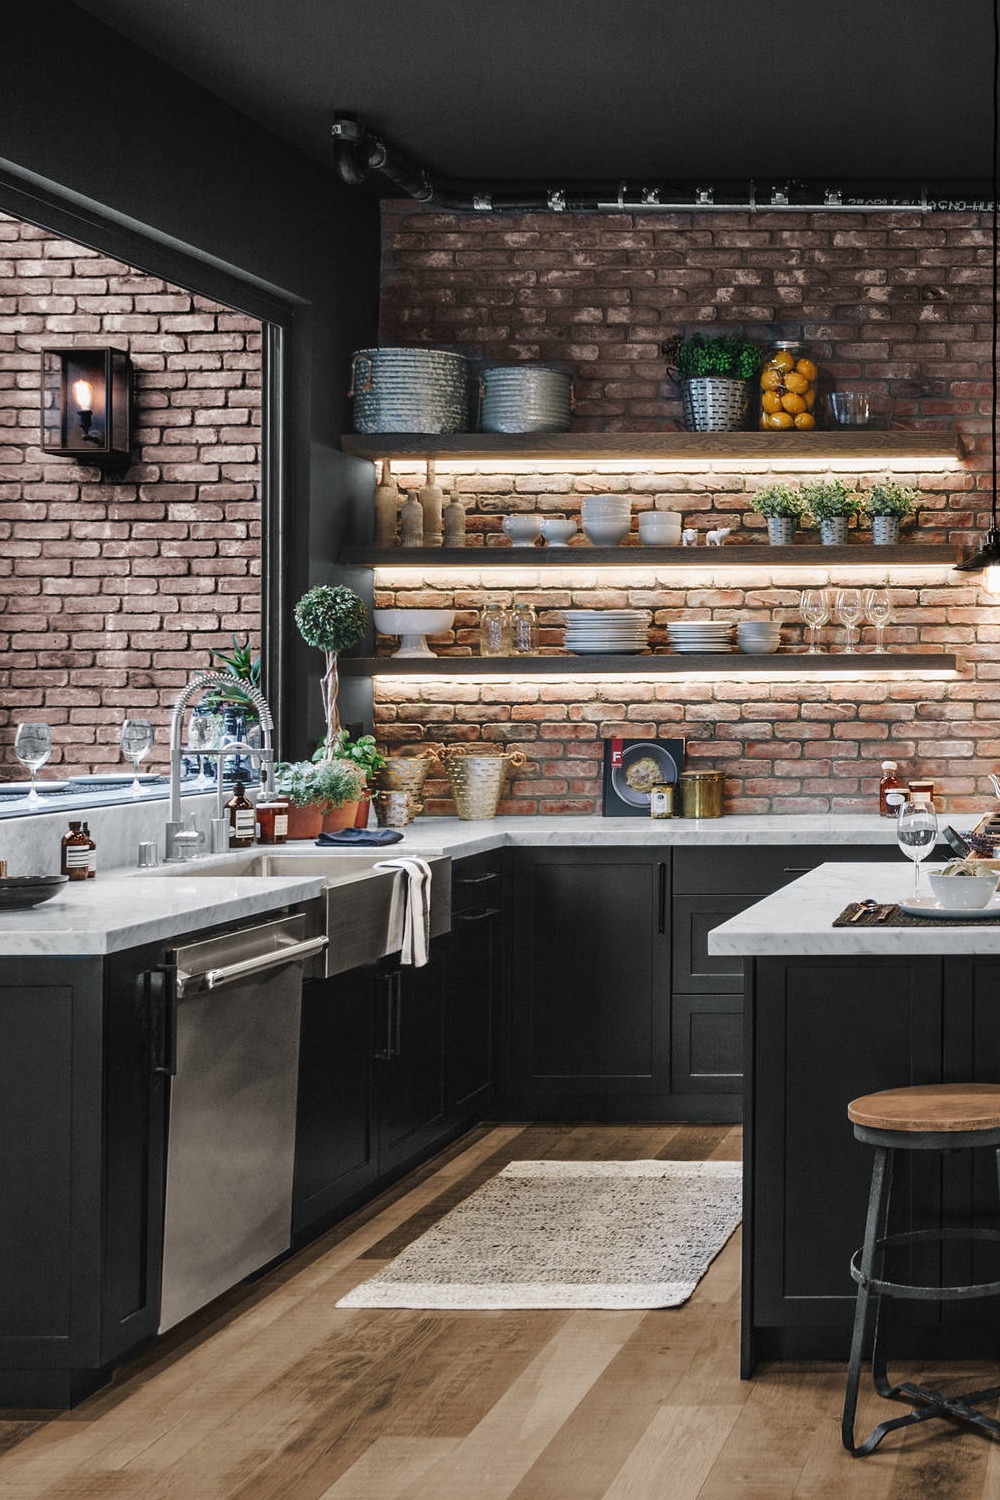 Black Kitchen Cabinets Stainless Steel Appliances Cooking Space Create Stand Shelves Brick Backsplash Wall